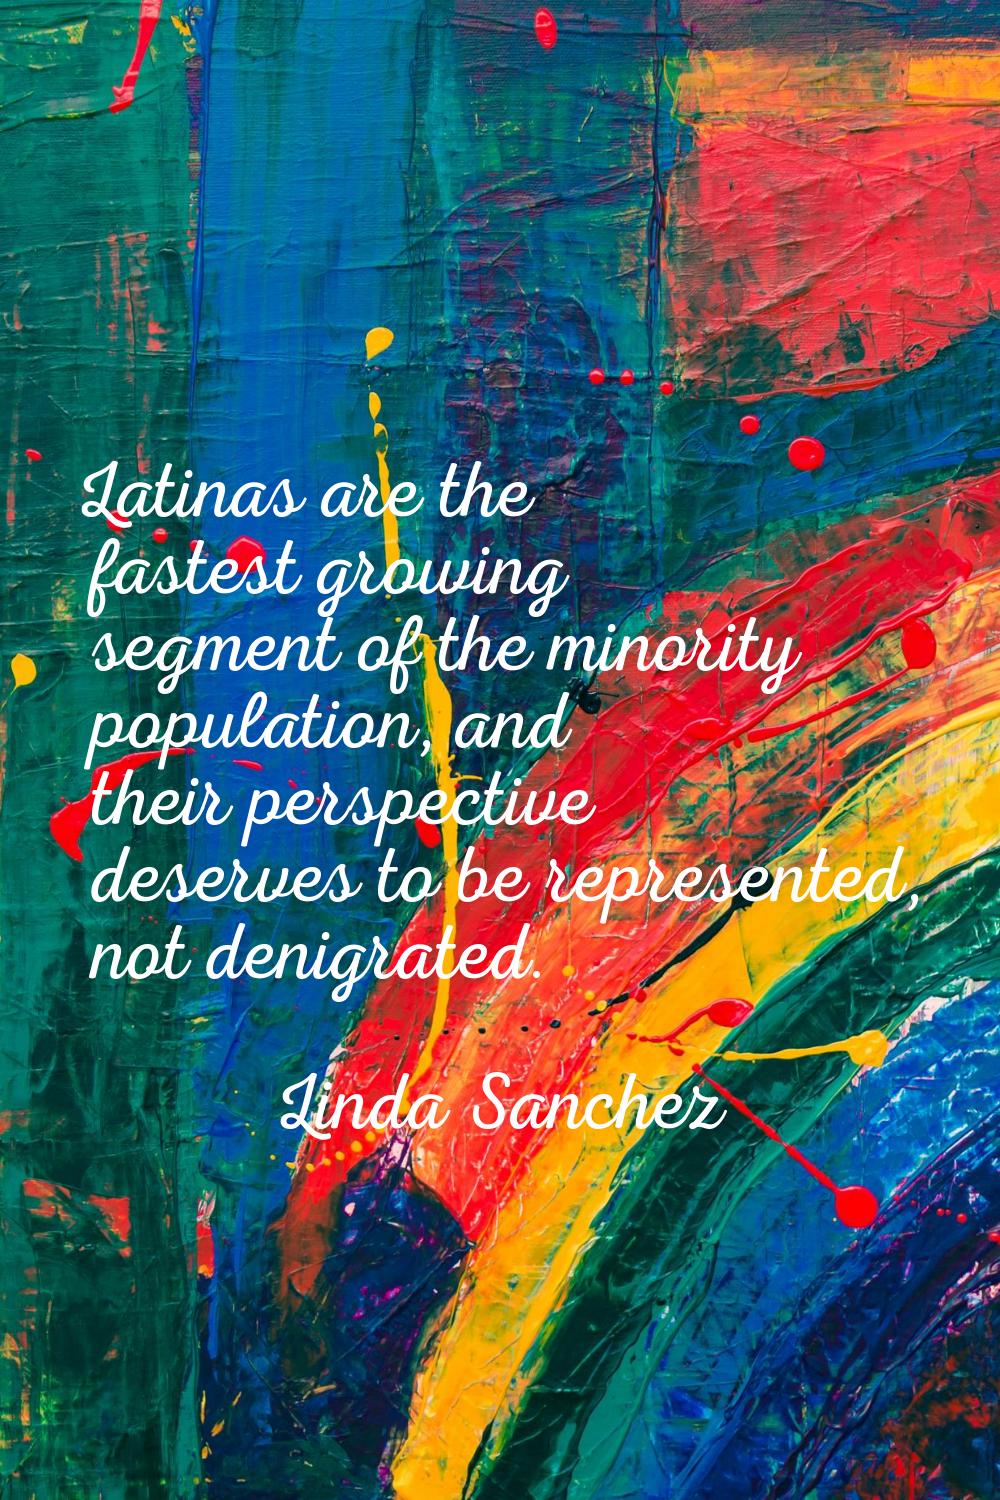 Latinas are the fastest growing segment of the minority population, and their perspective deserves 